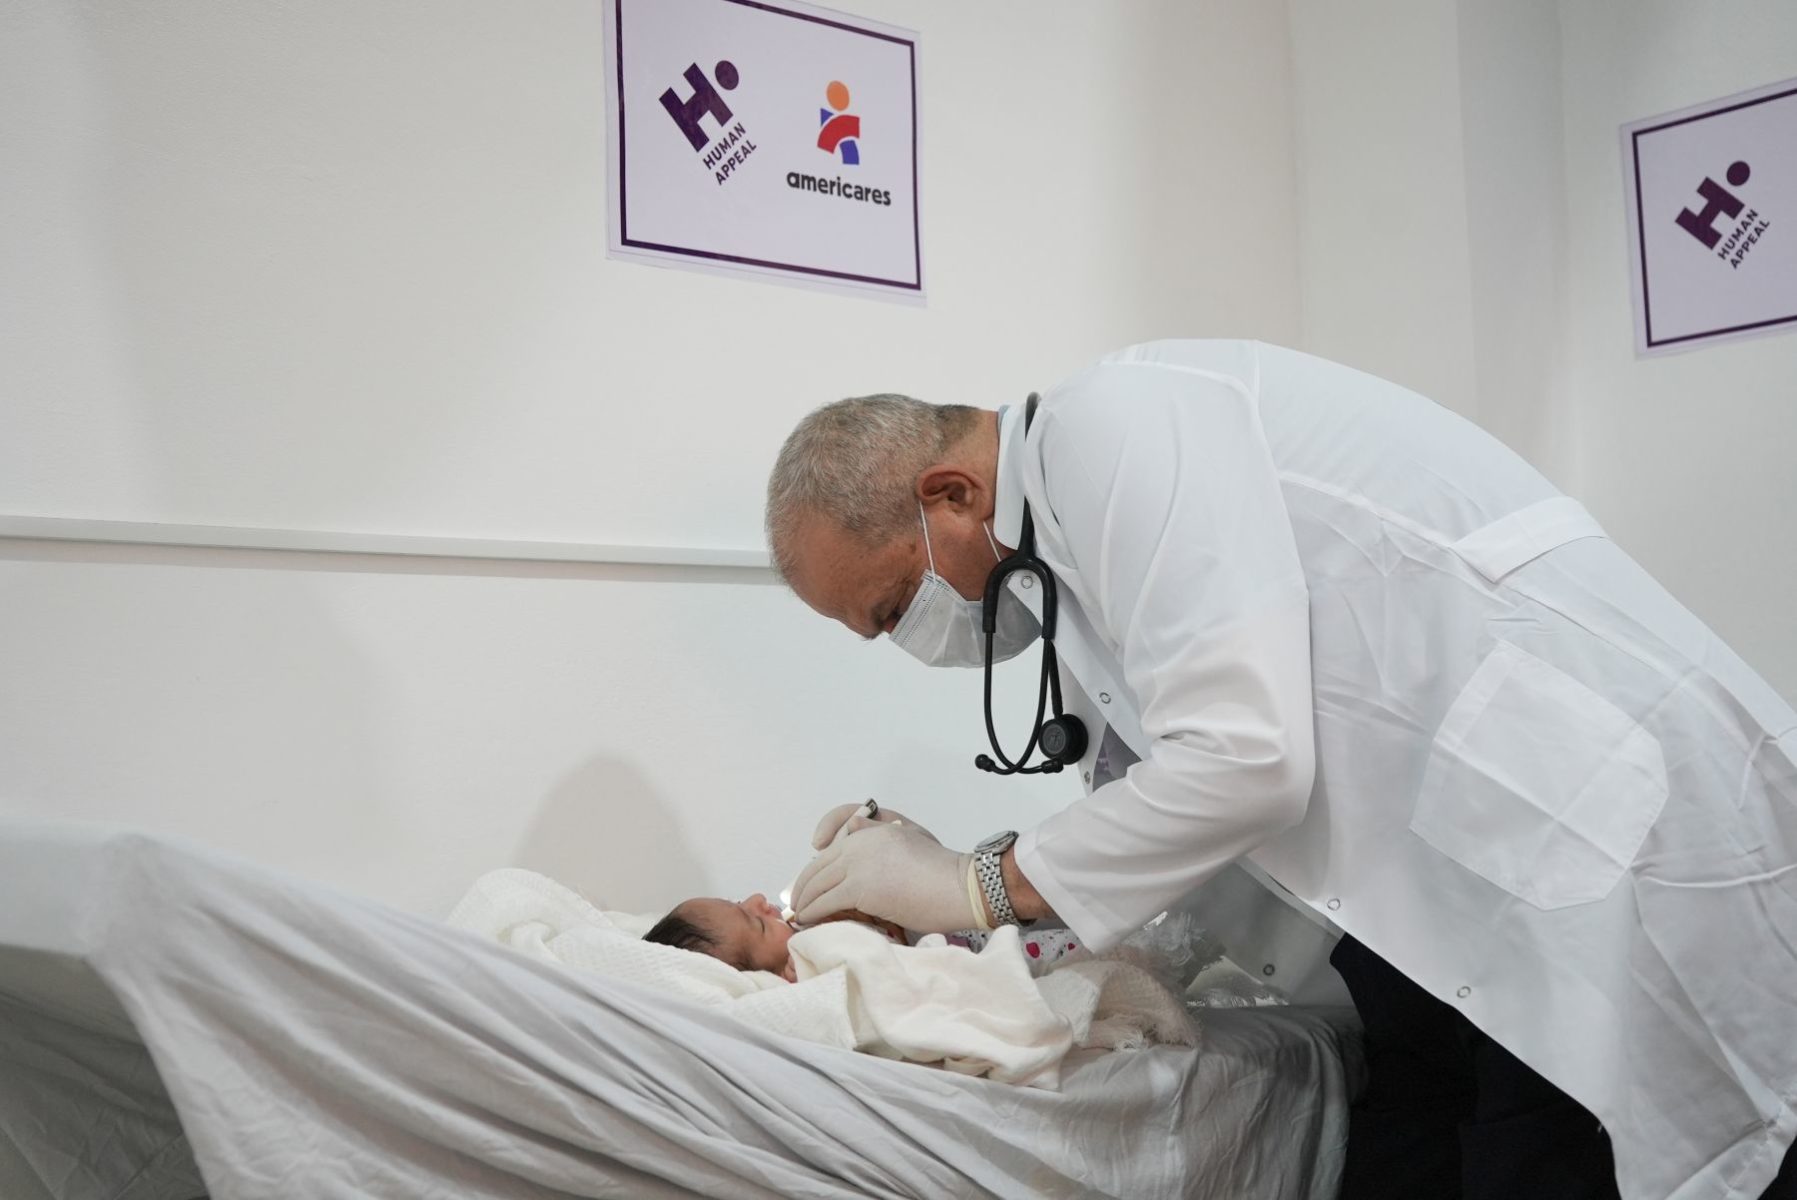 Doctor in white lab coat with mask and stethoscope examines a baby.